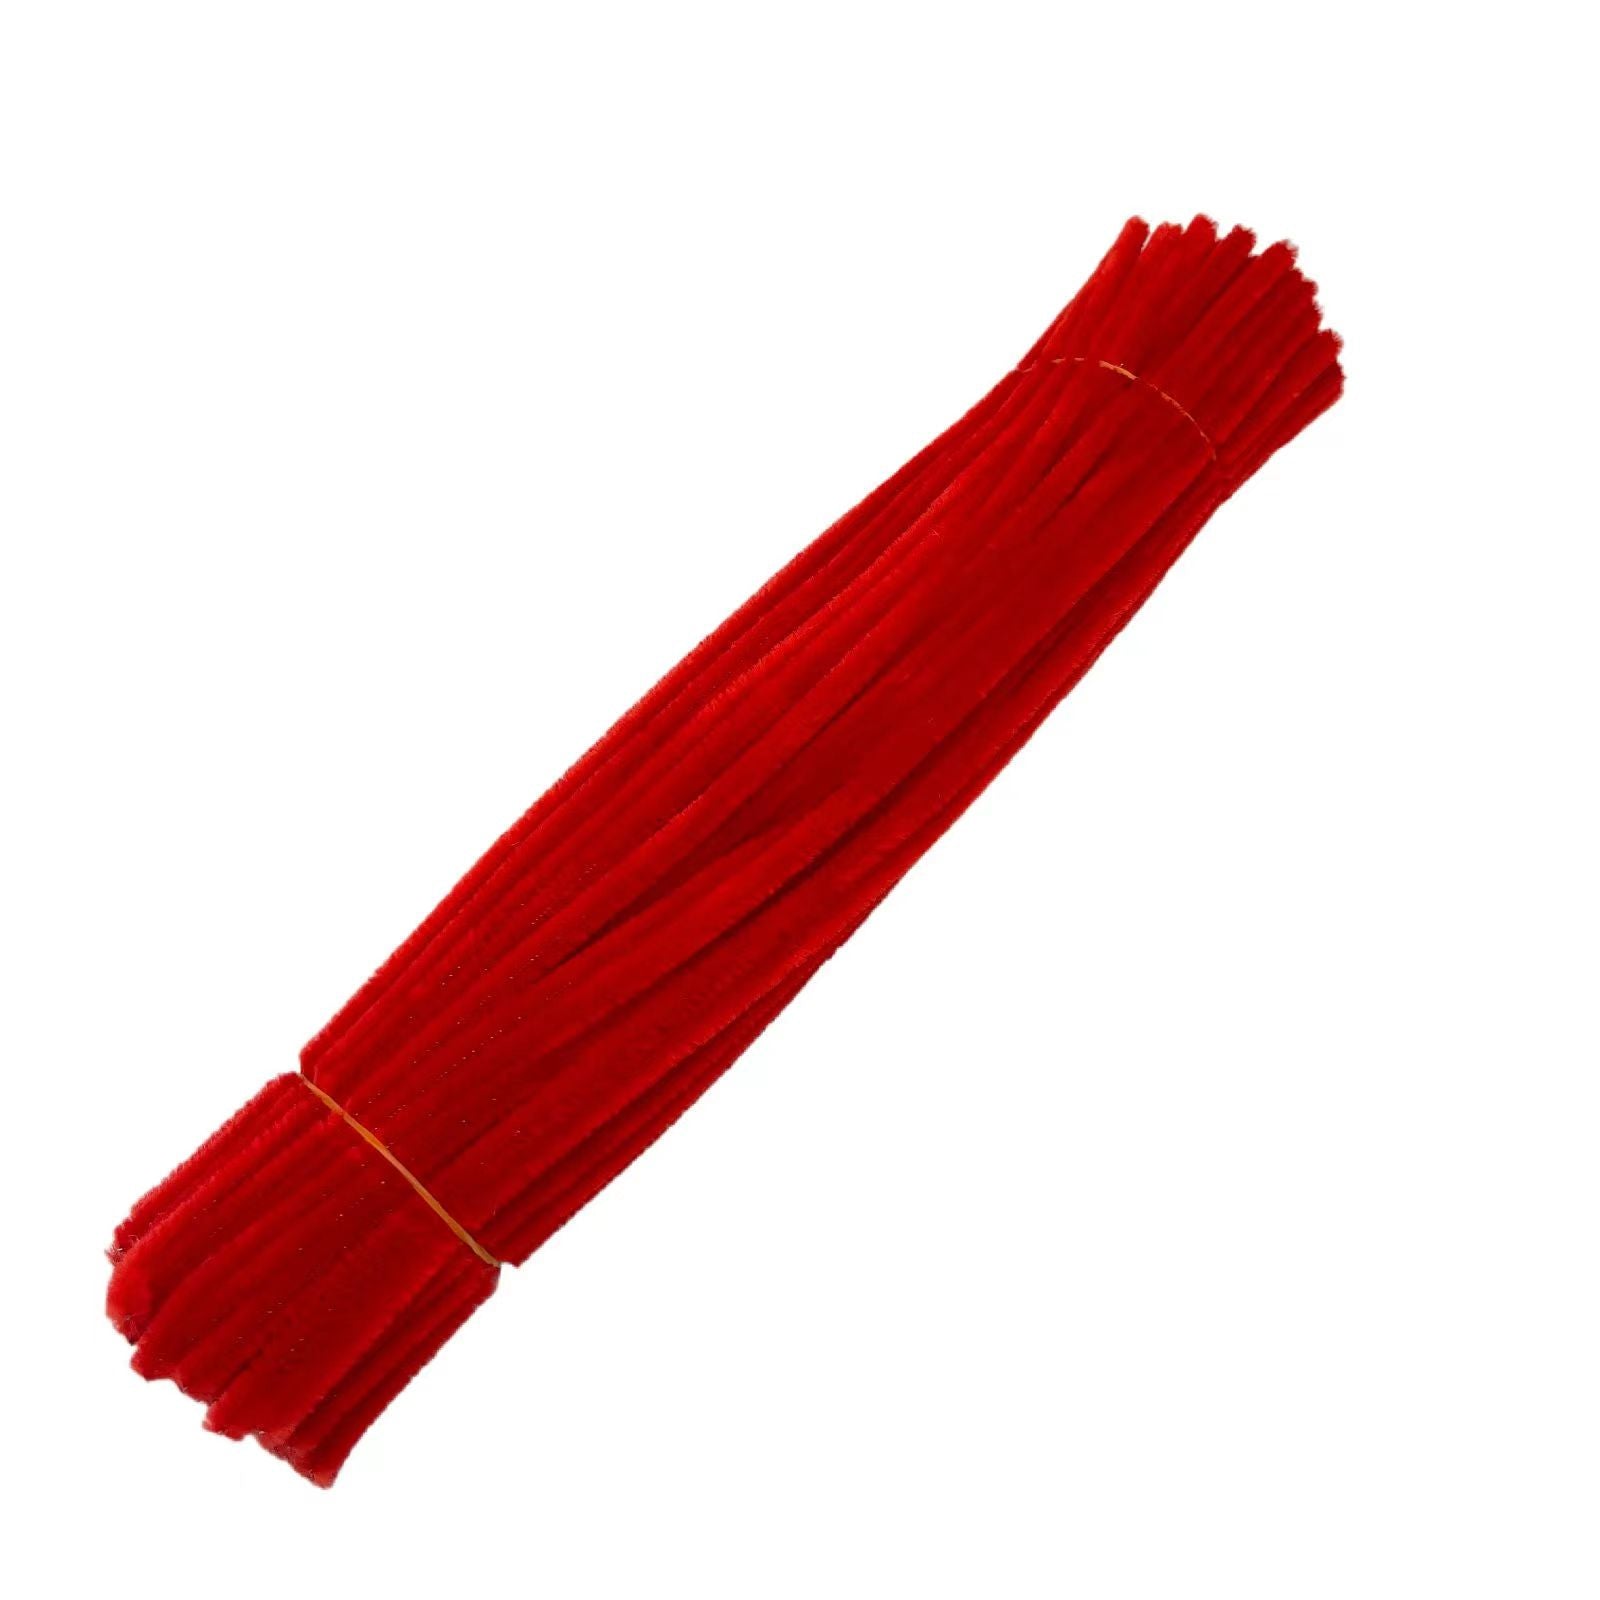 Chenille Craft Stems in Red Assorted Red Pipe Cleaners 20 Pieces Supplies  for DIY Projects or Kids Crafts 